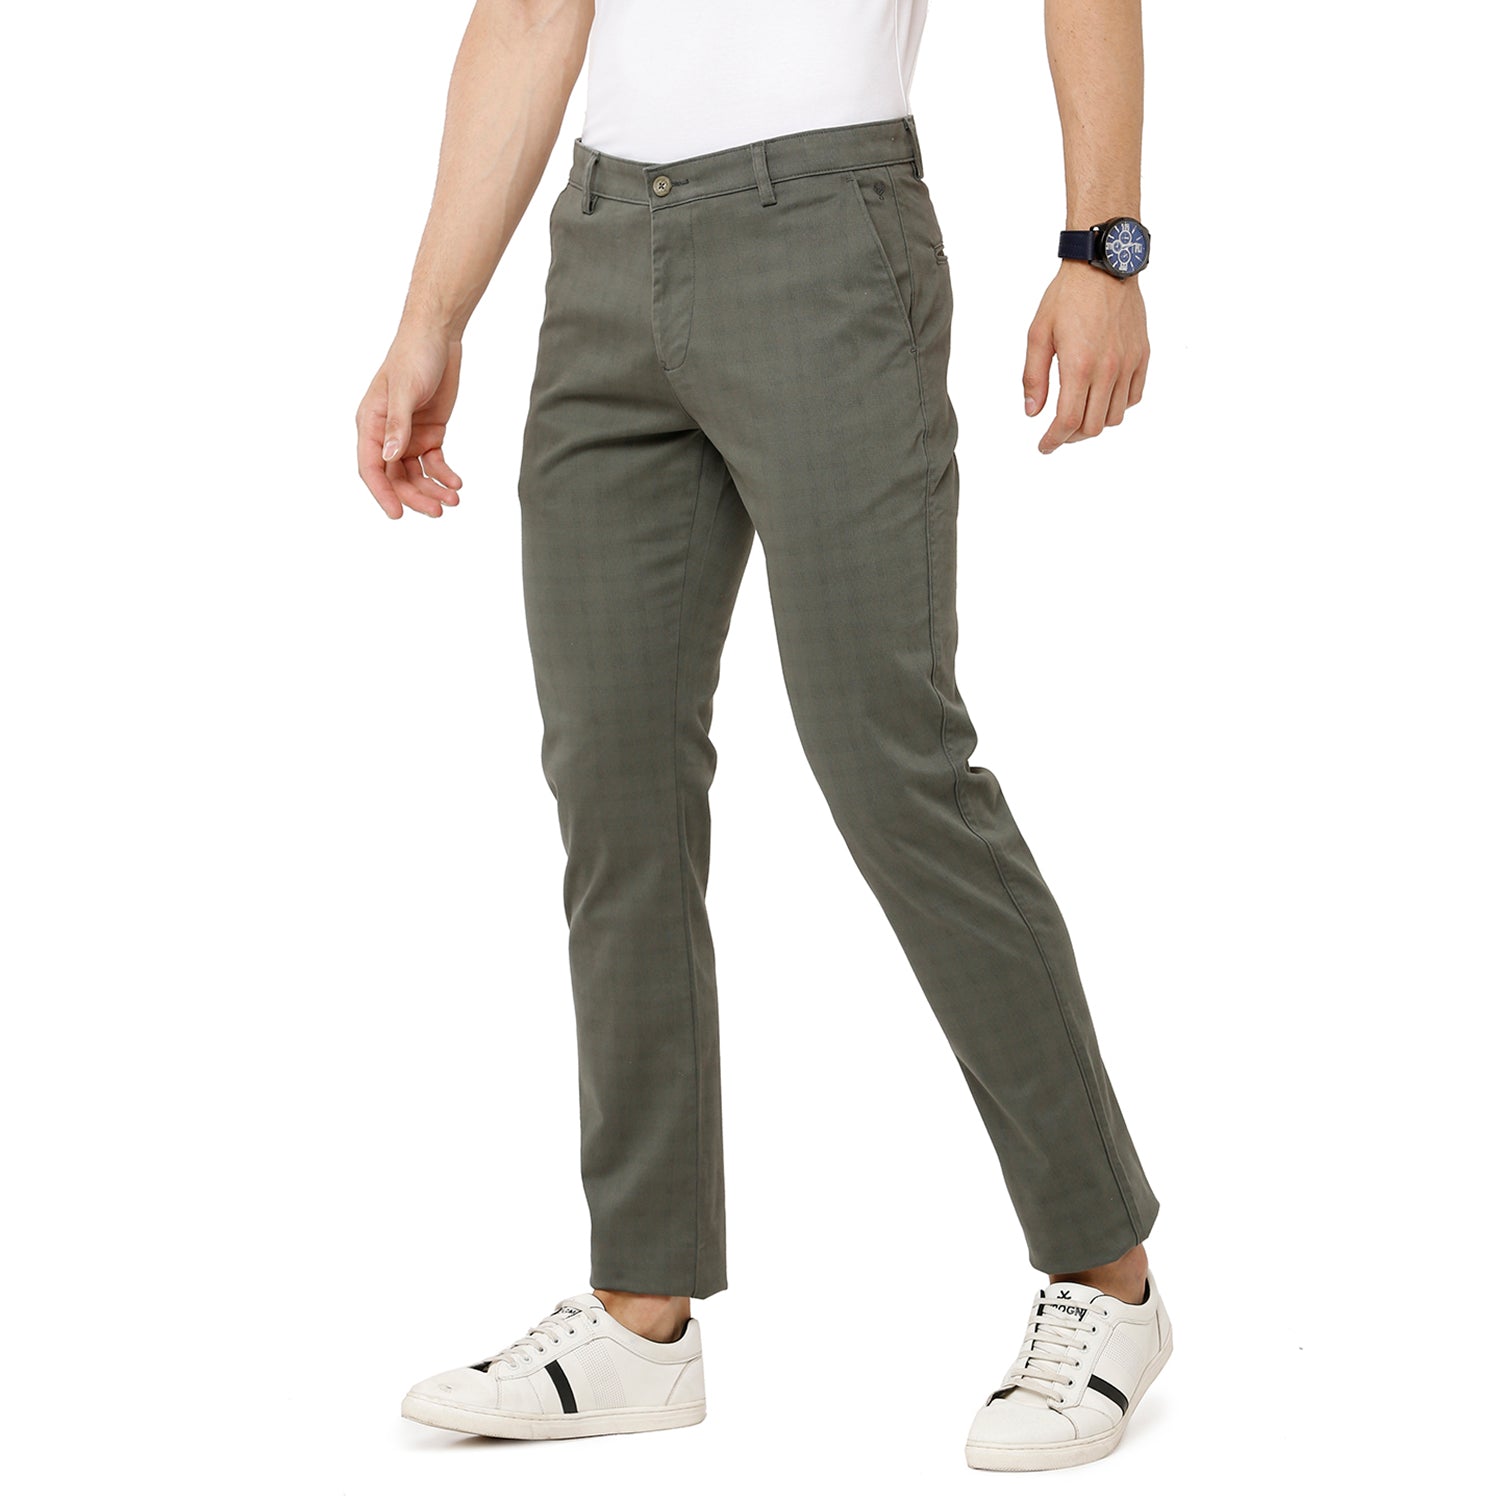 Classic Polo Mens 100% Cotton Checked Moderate Fit Grey Color Trousers - TN1-05 A-GRE classic polo trousers Classic Polo 